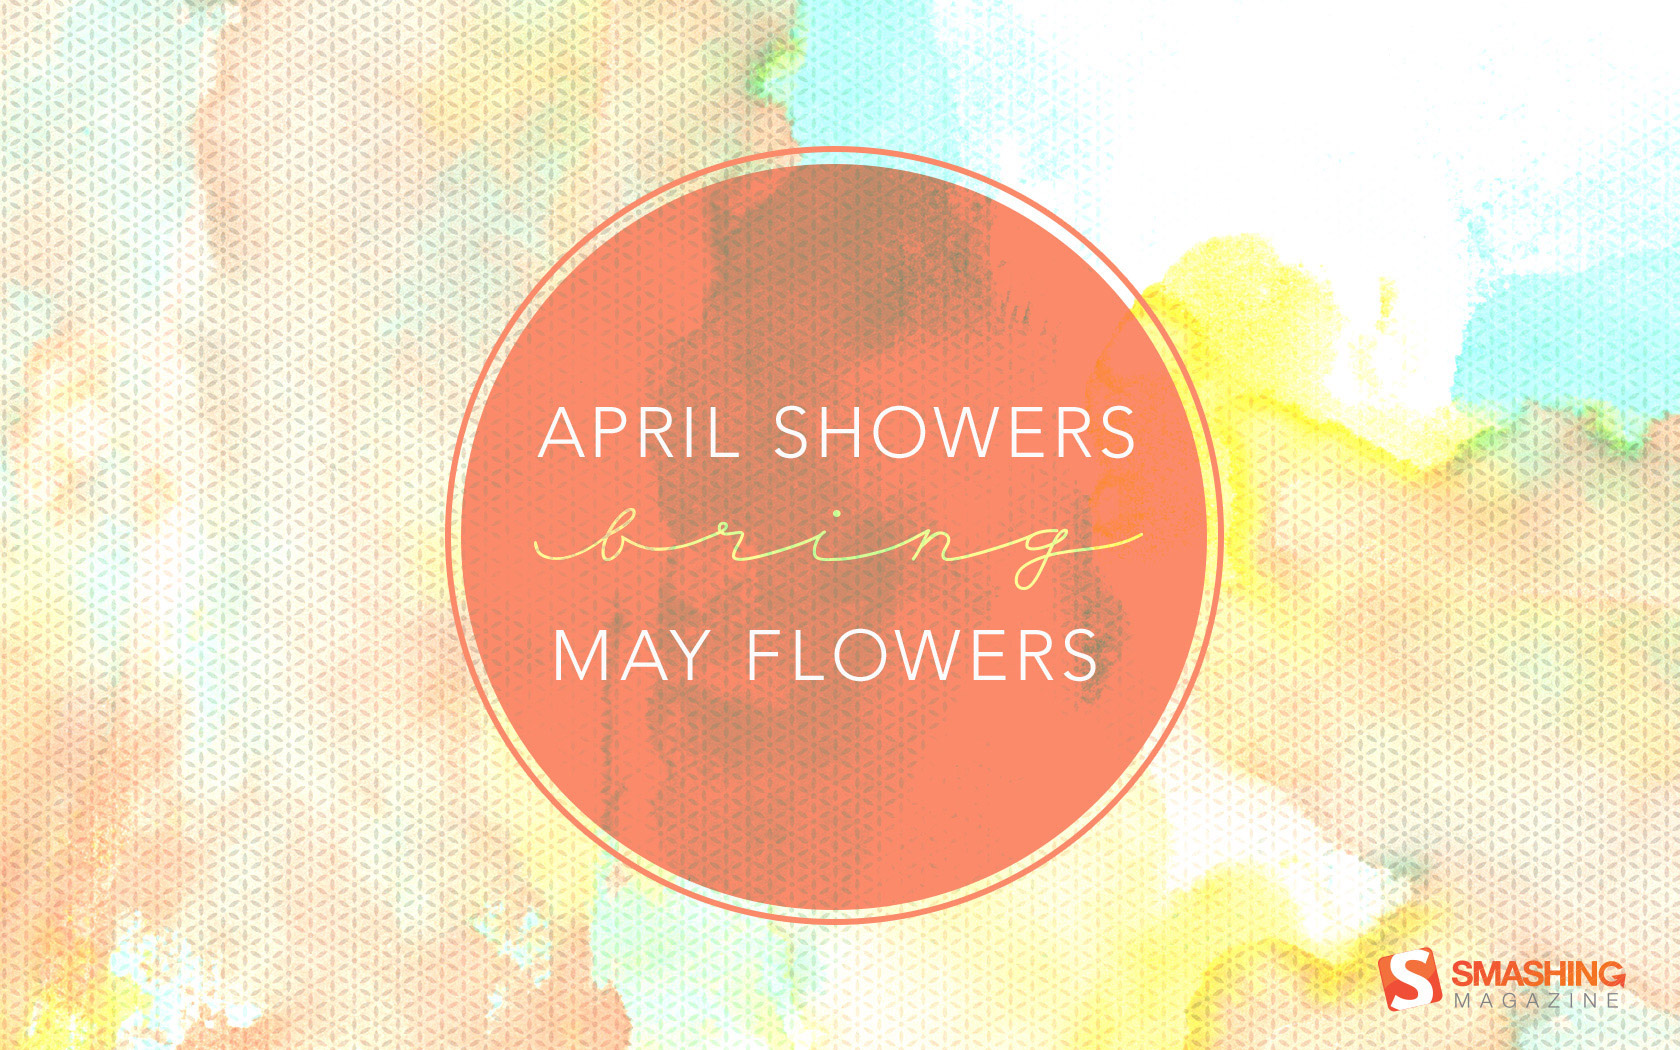 May shower. April Showers bring May Flowers. April Showers обложка. April Showers PROLETER обложка. April Showers Ноты.